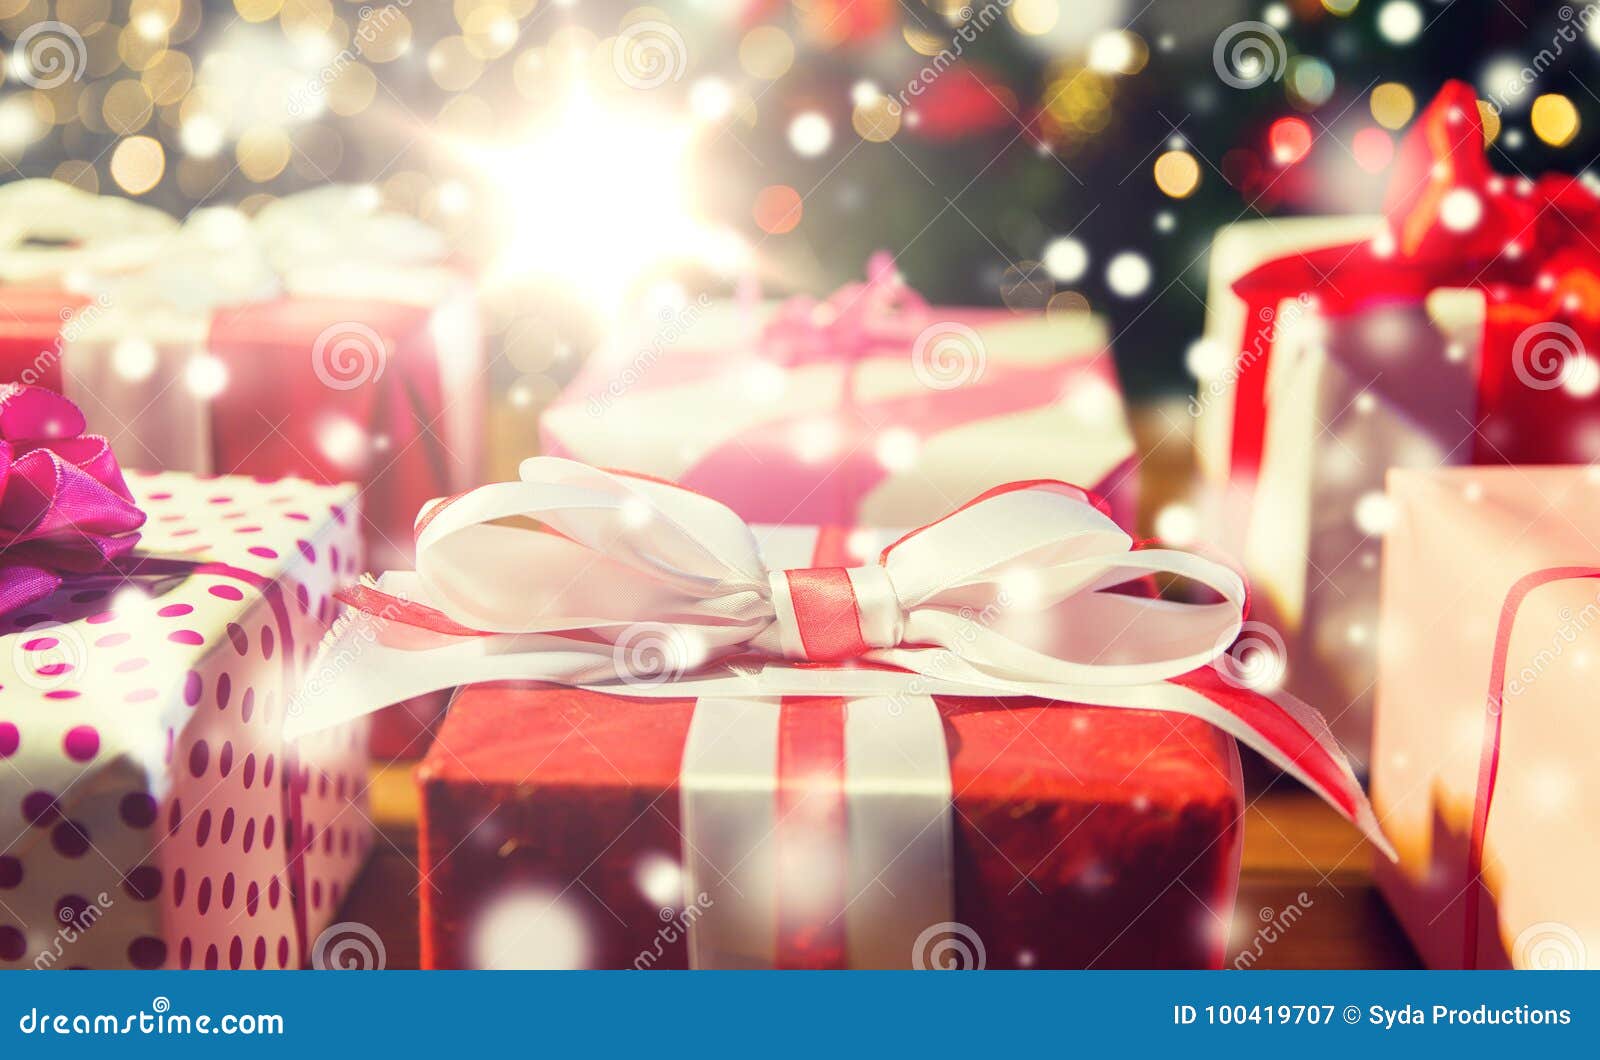 Close Up of Gift Boxes Over Christmas Tree Lights Stock Image - Image ...